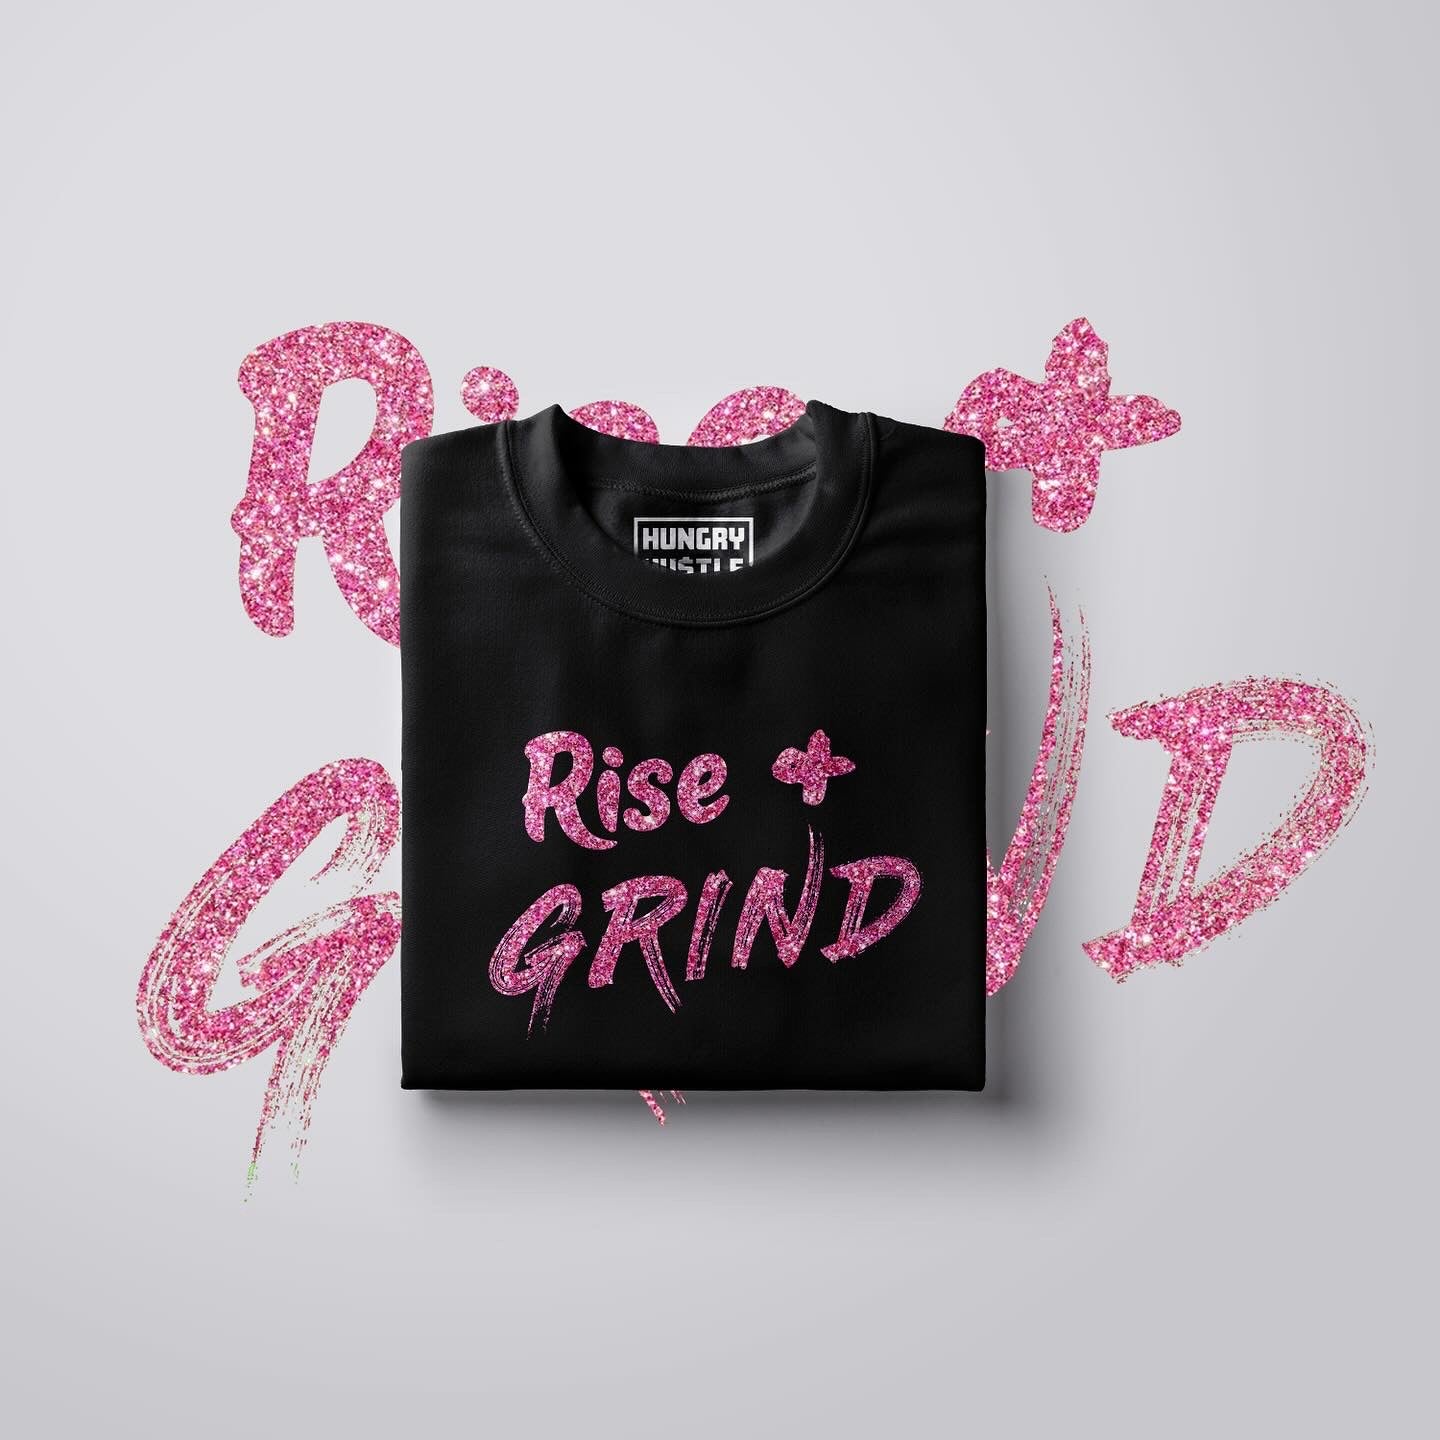 Hungry Hustle by JagRaw “Rise & Grind” Hourglass Sweatsuits